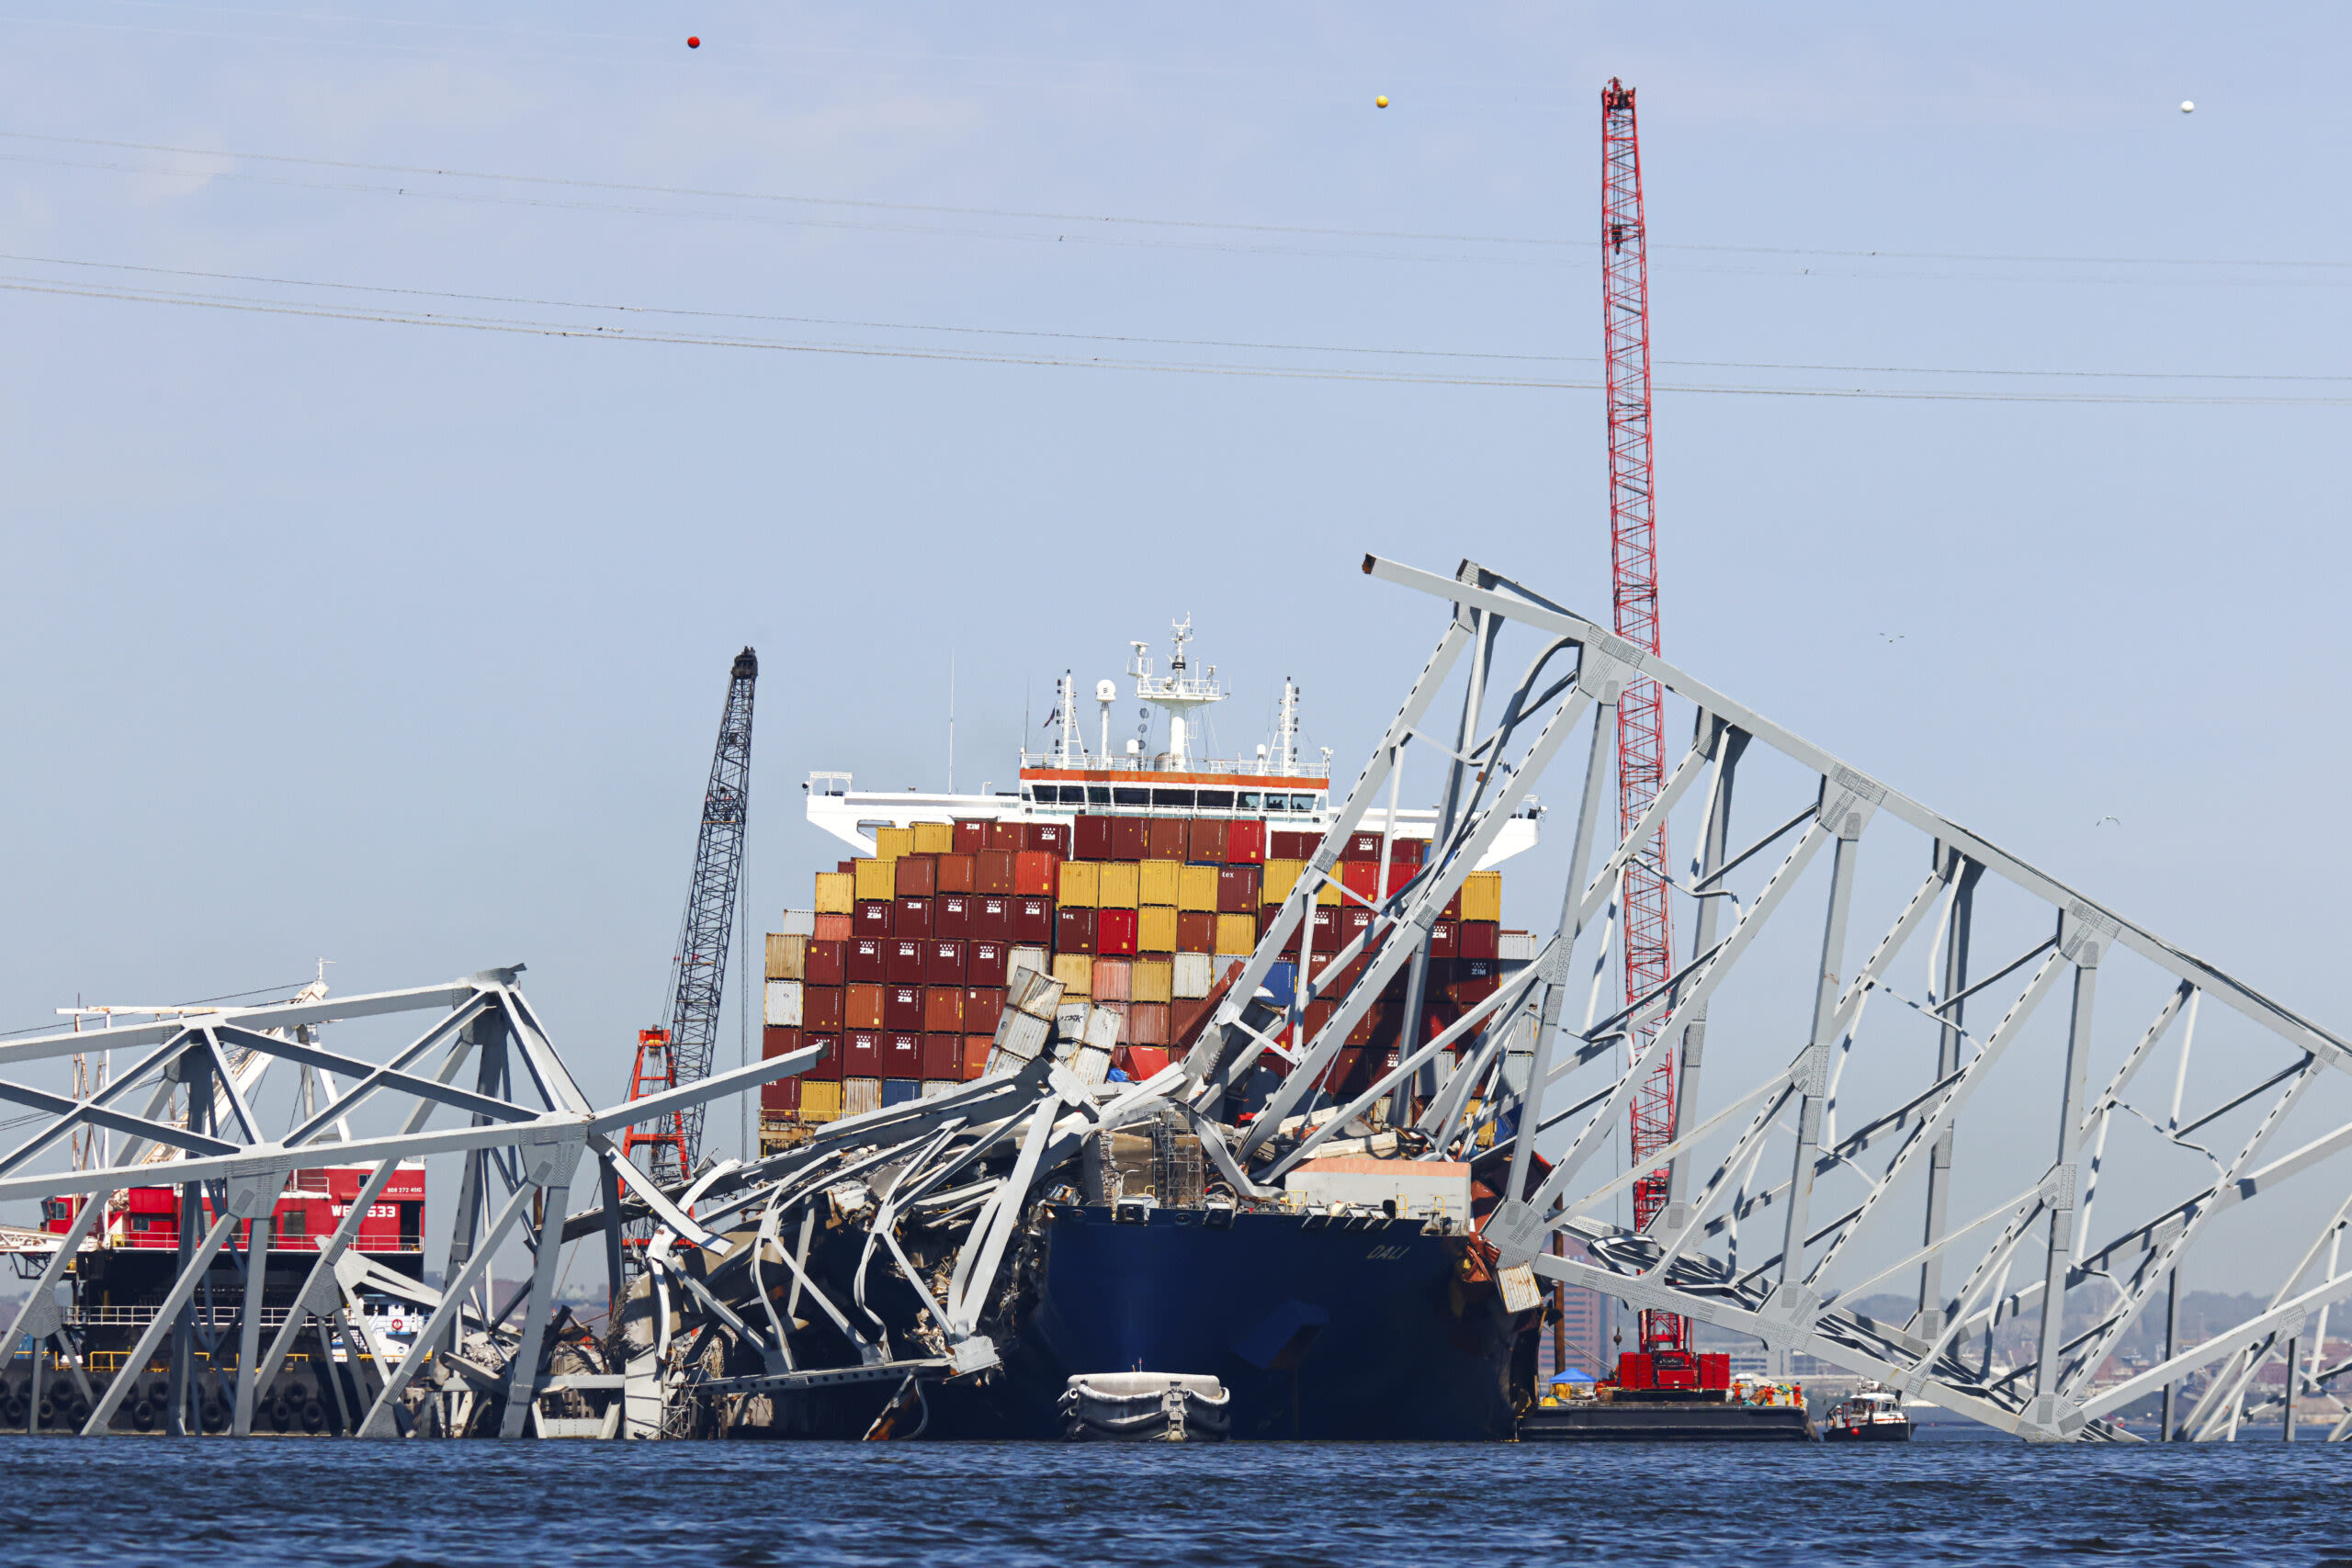 Dali Crew Can Leave But Must Be Available for Probe Into Baltimore Bridge Collapse